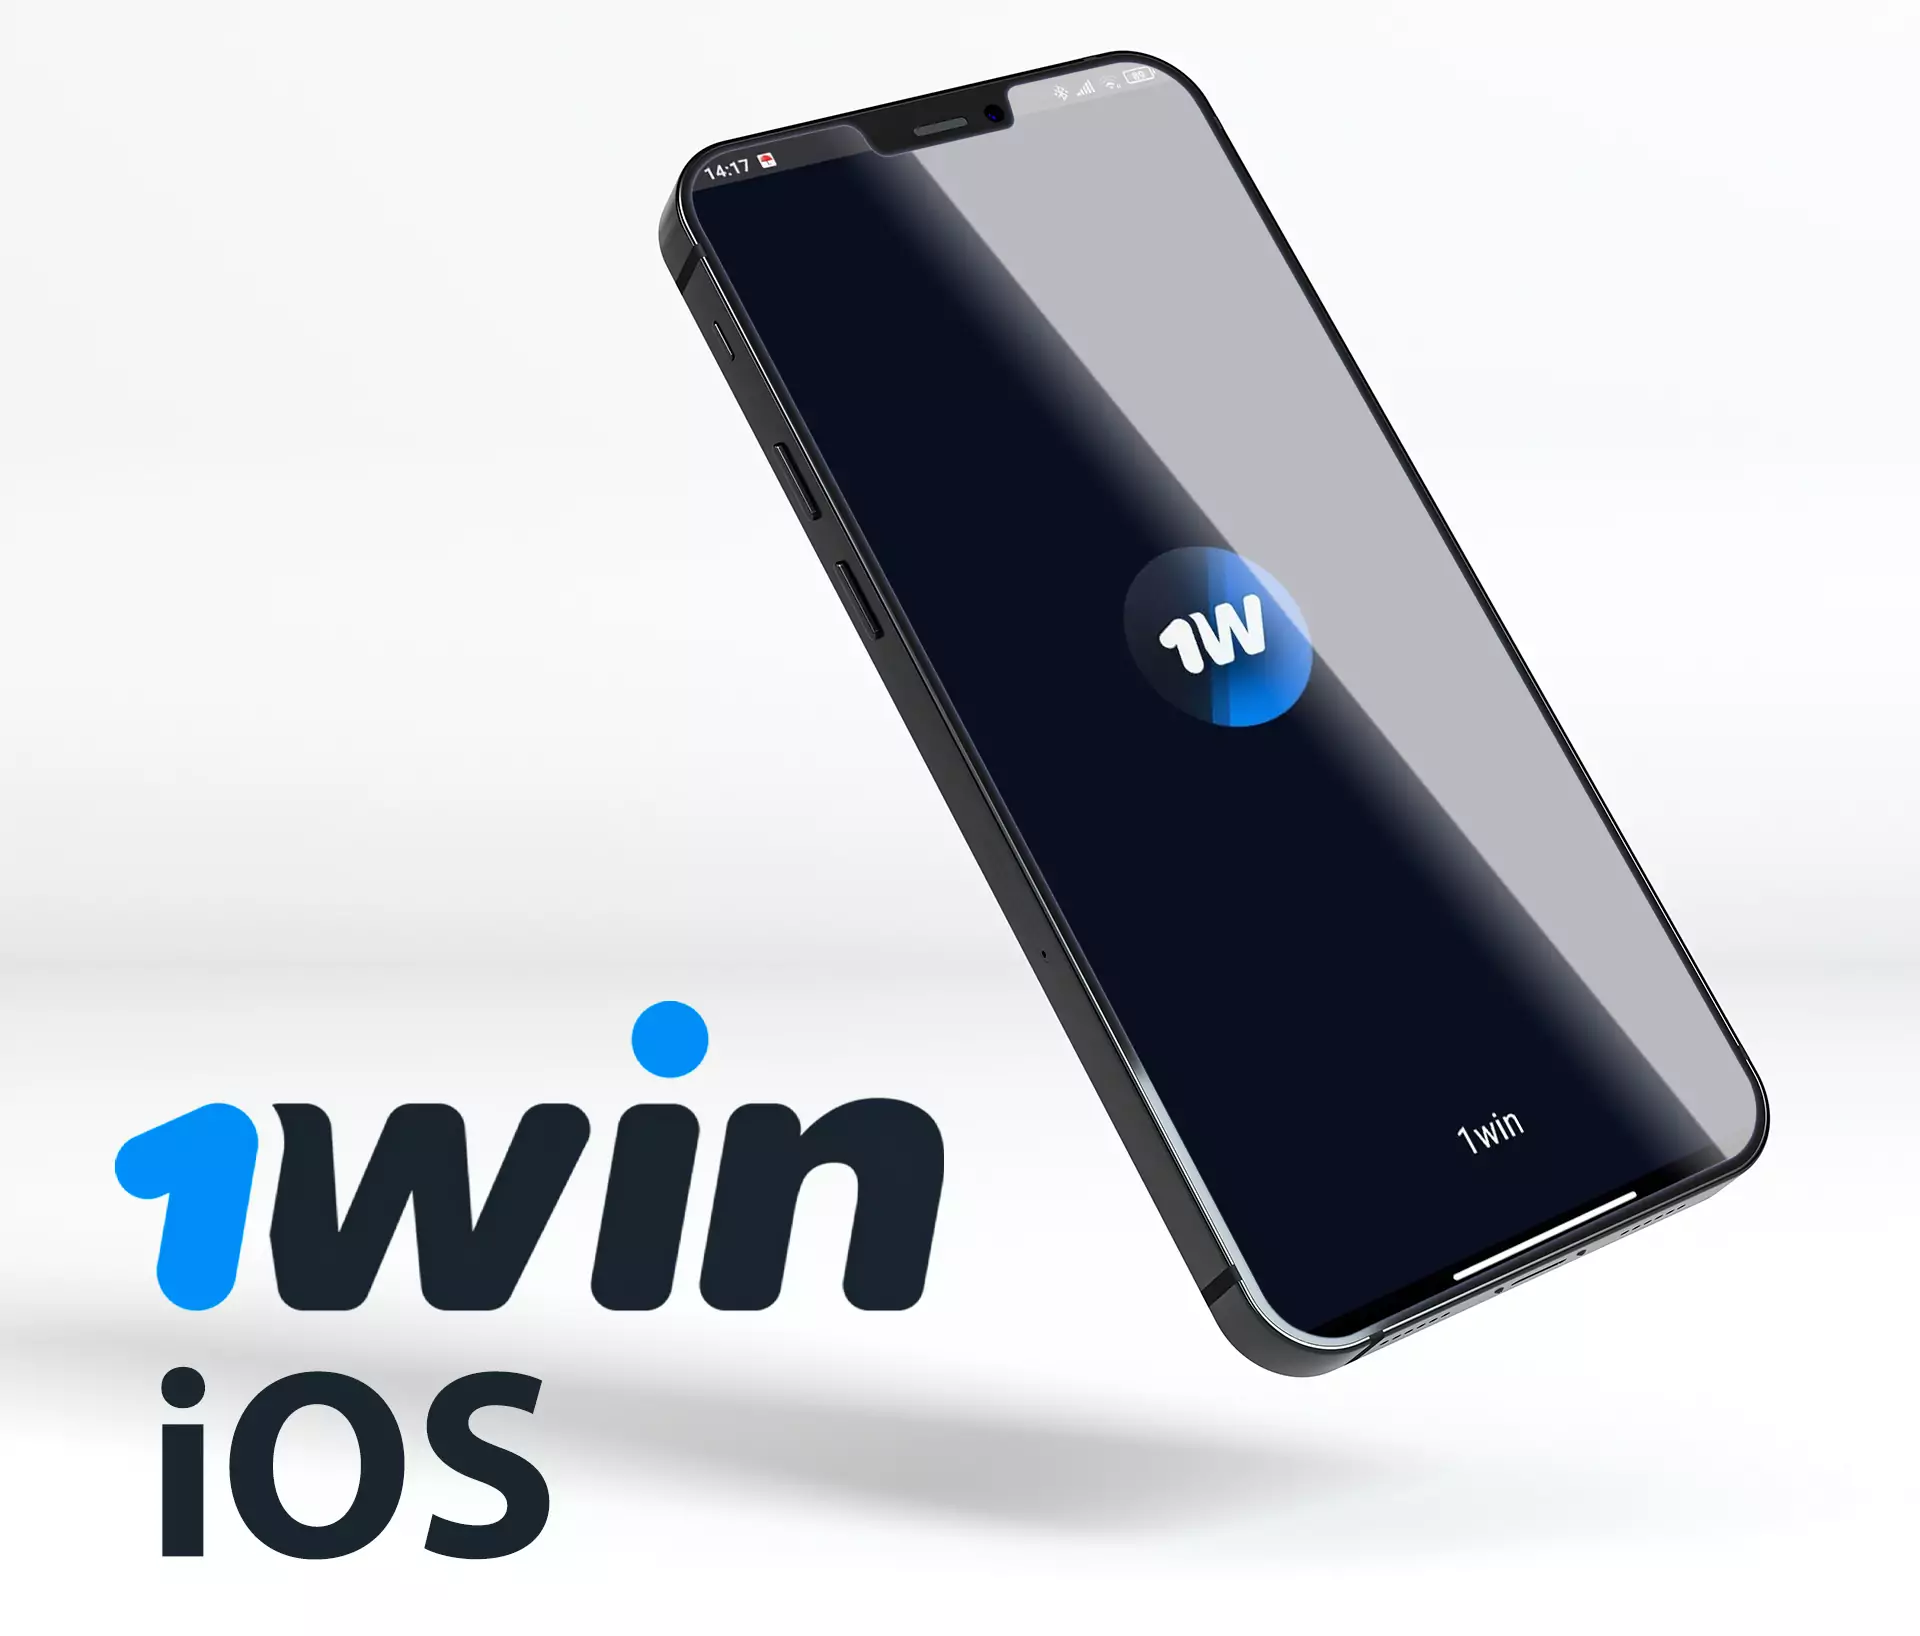 You can download the 1win app for iOS only from the 1win official website.